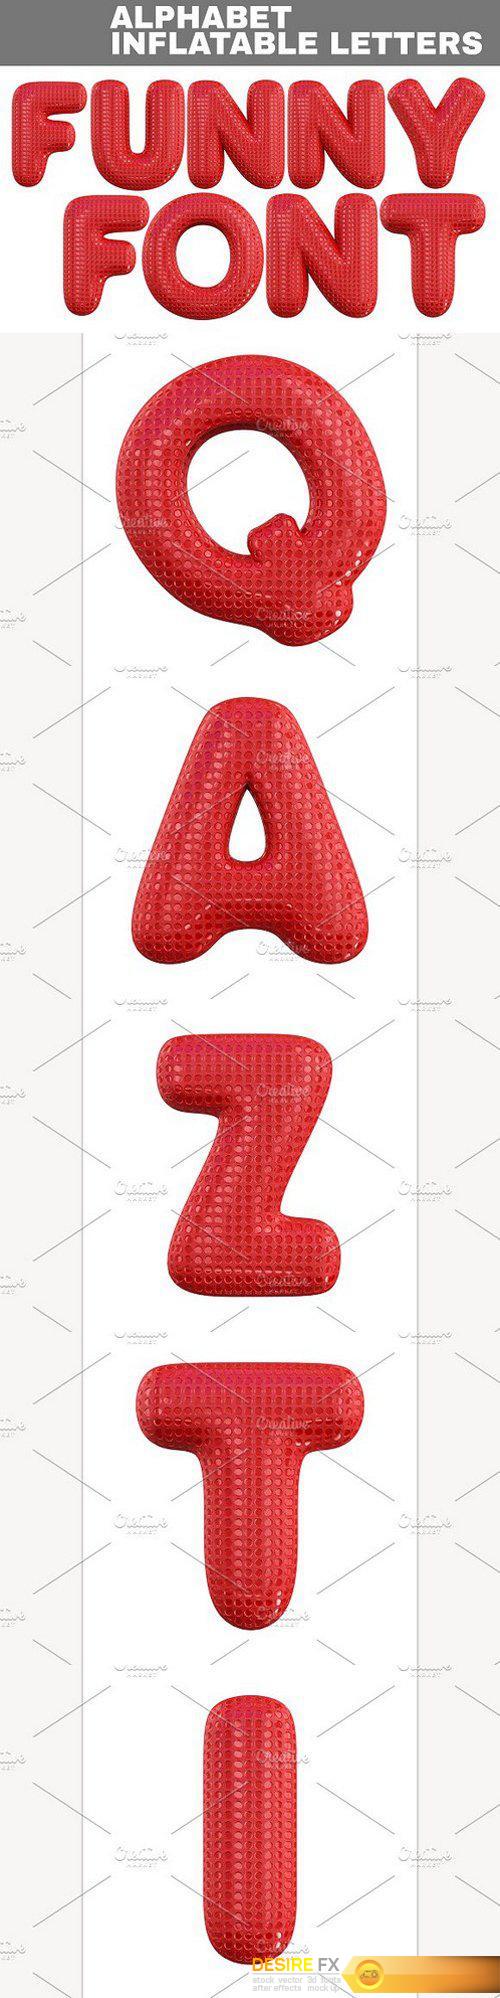 CM - Inflatable letters 1436698